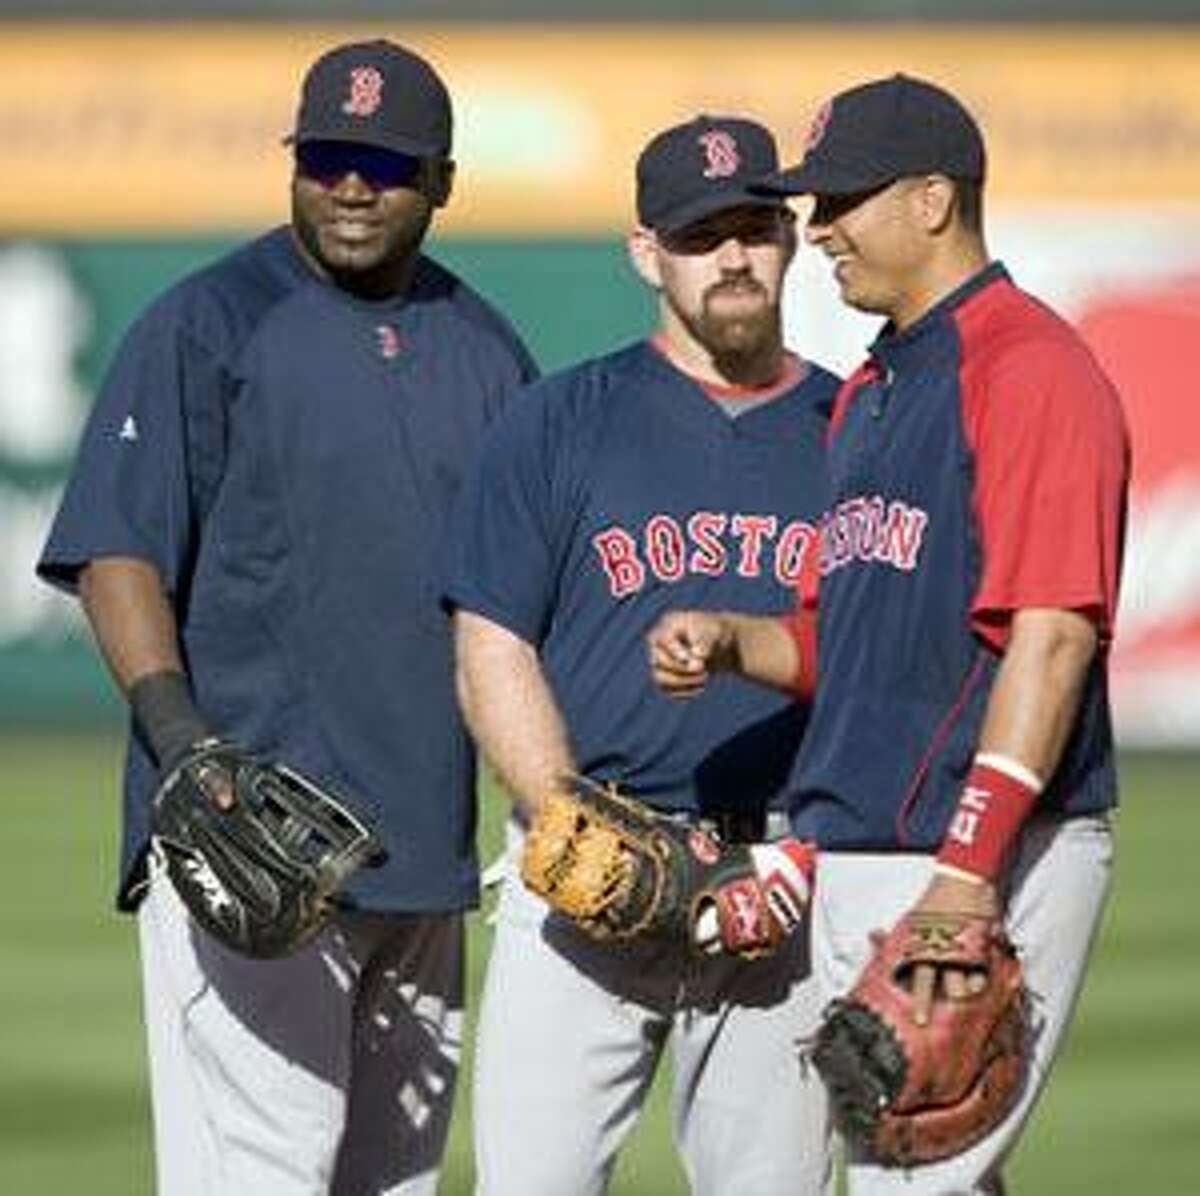 AP Boston Red Sox designated hitter David Ortiz, left, first baseman Kevin Youkilis and catcher Victor Martinez chat during practice Tuesday in Anaheim, Calif., ahead of the team's upcoming American League division series against the Los Angeles Angels.